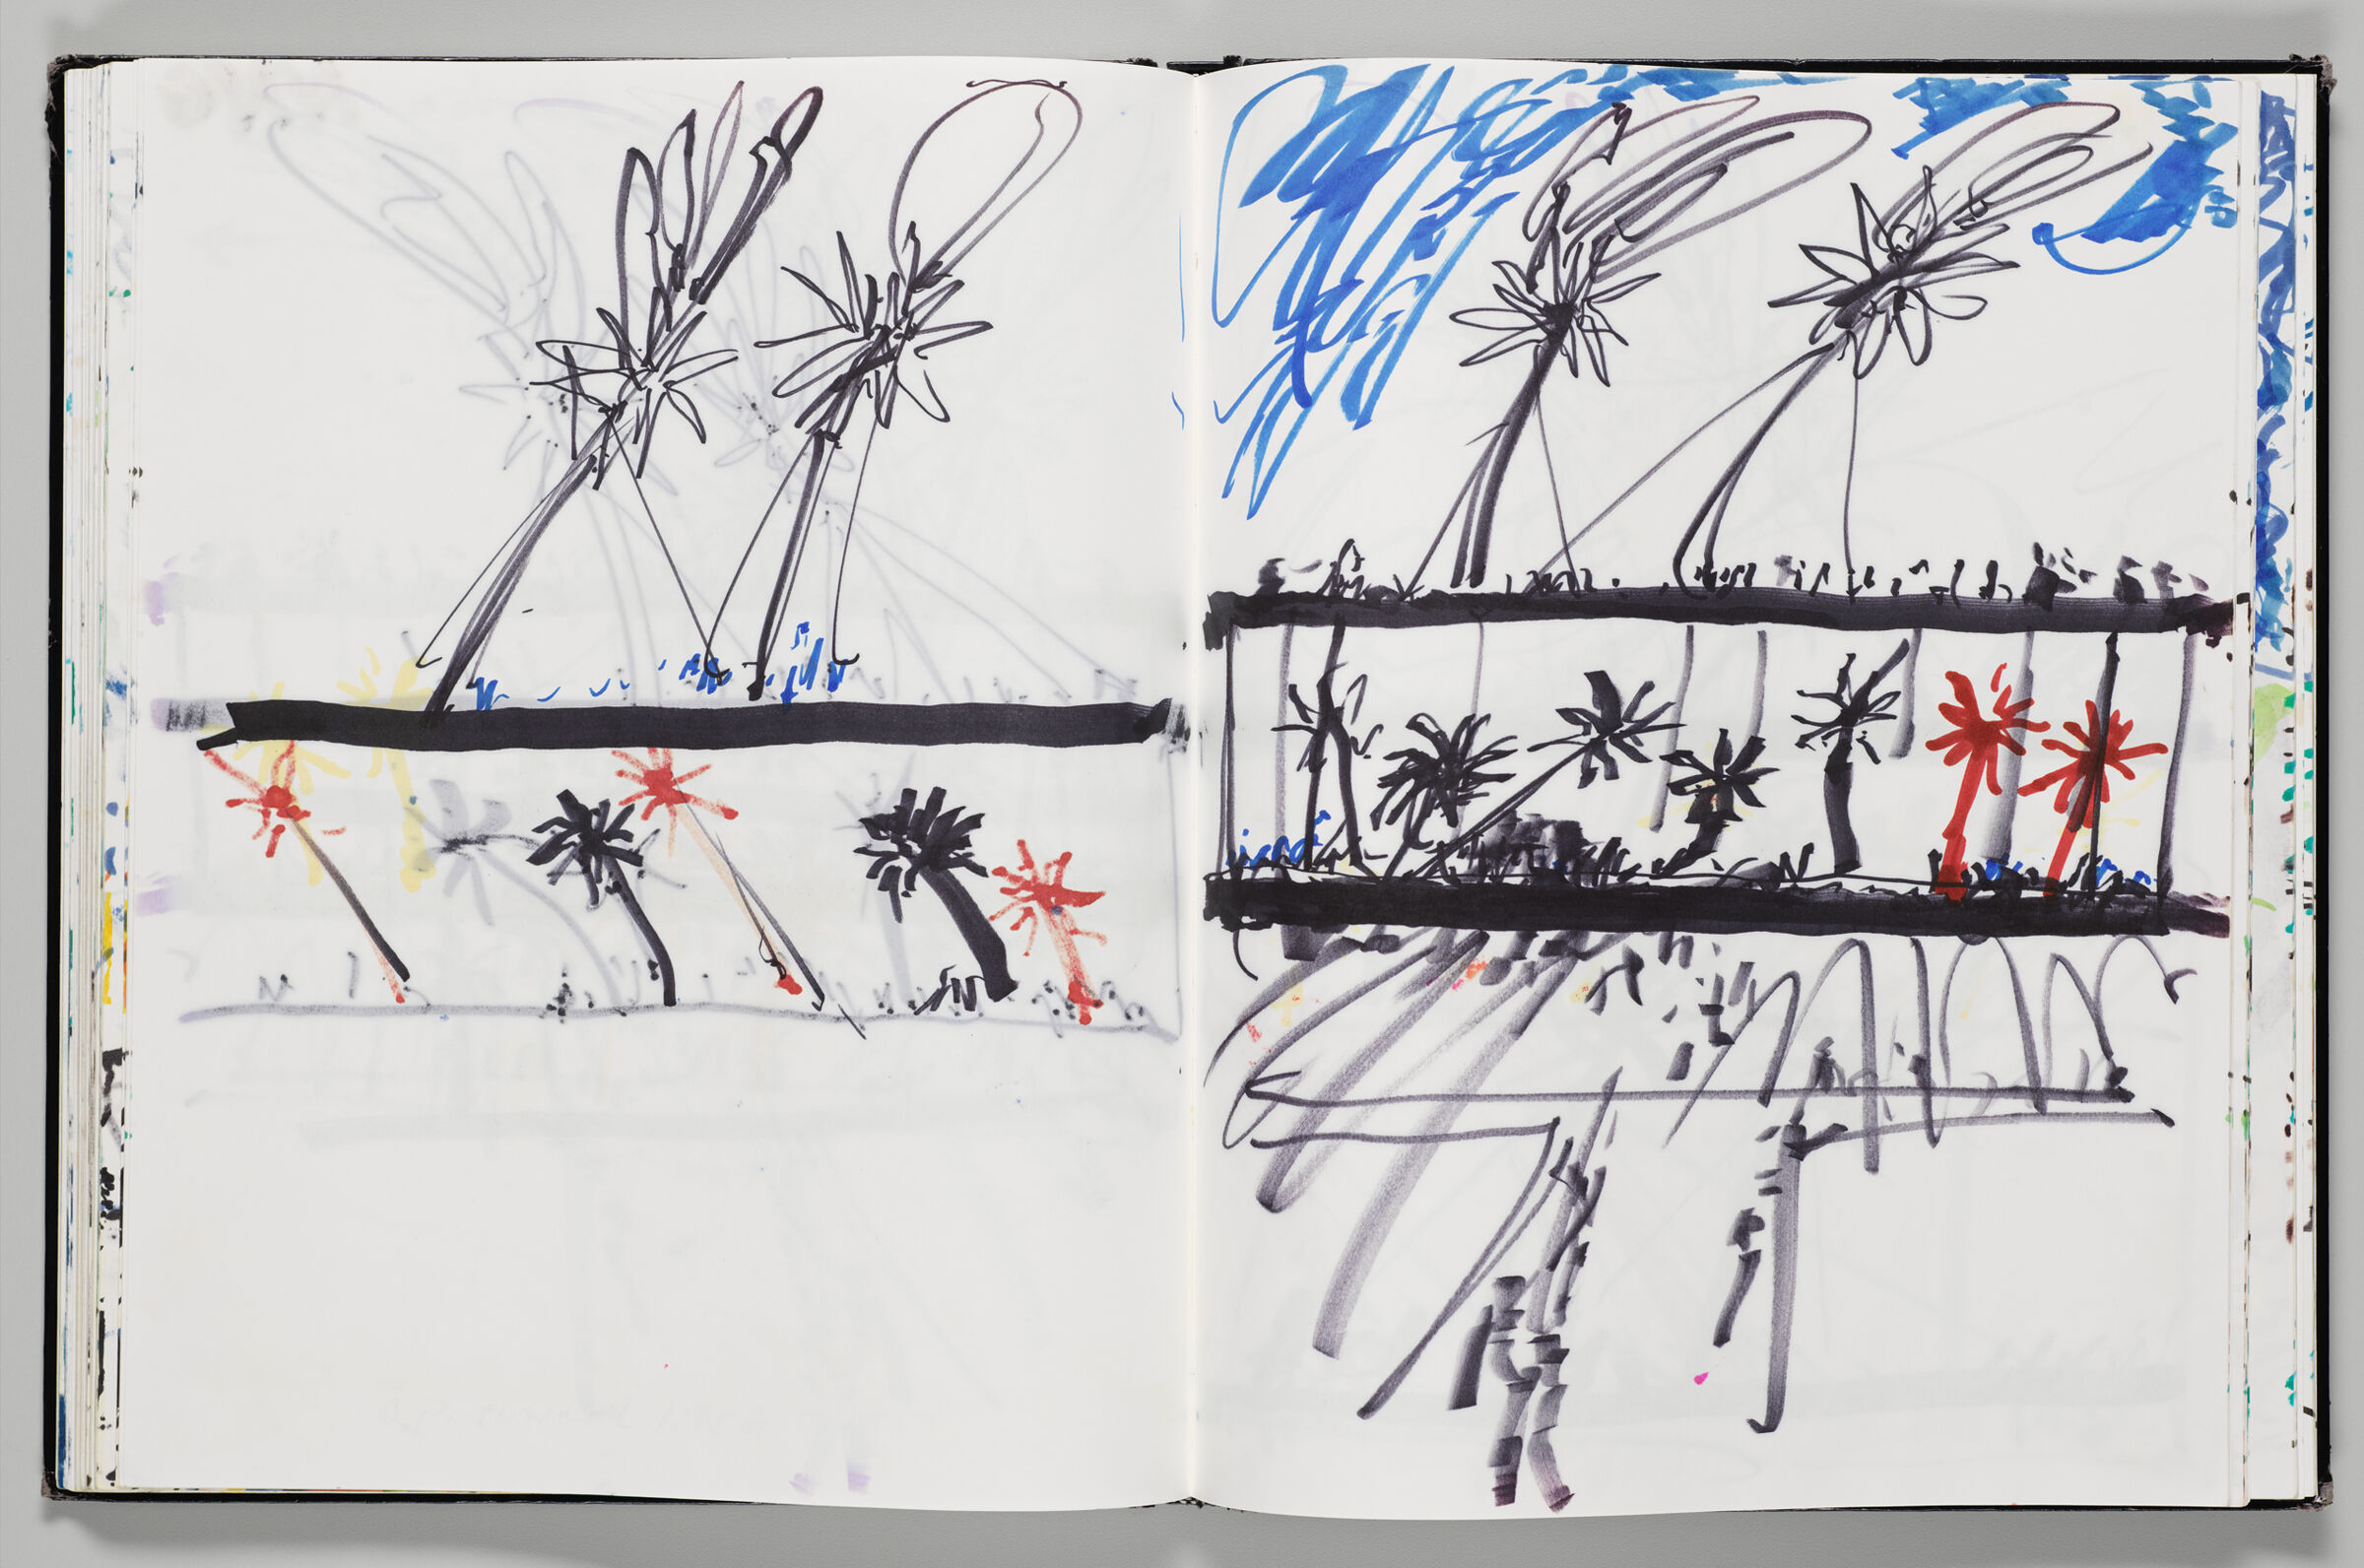 Untitled (Design For Neue Nationalgalerie Inflatables Over Bleed-Through Of Previous Page And Color Transfer, Left Page); Untitled (Design For Neue Nationalgalerie Inflatables Over Bleed-Through Of Following Page And Color Transfer, Right Page)